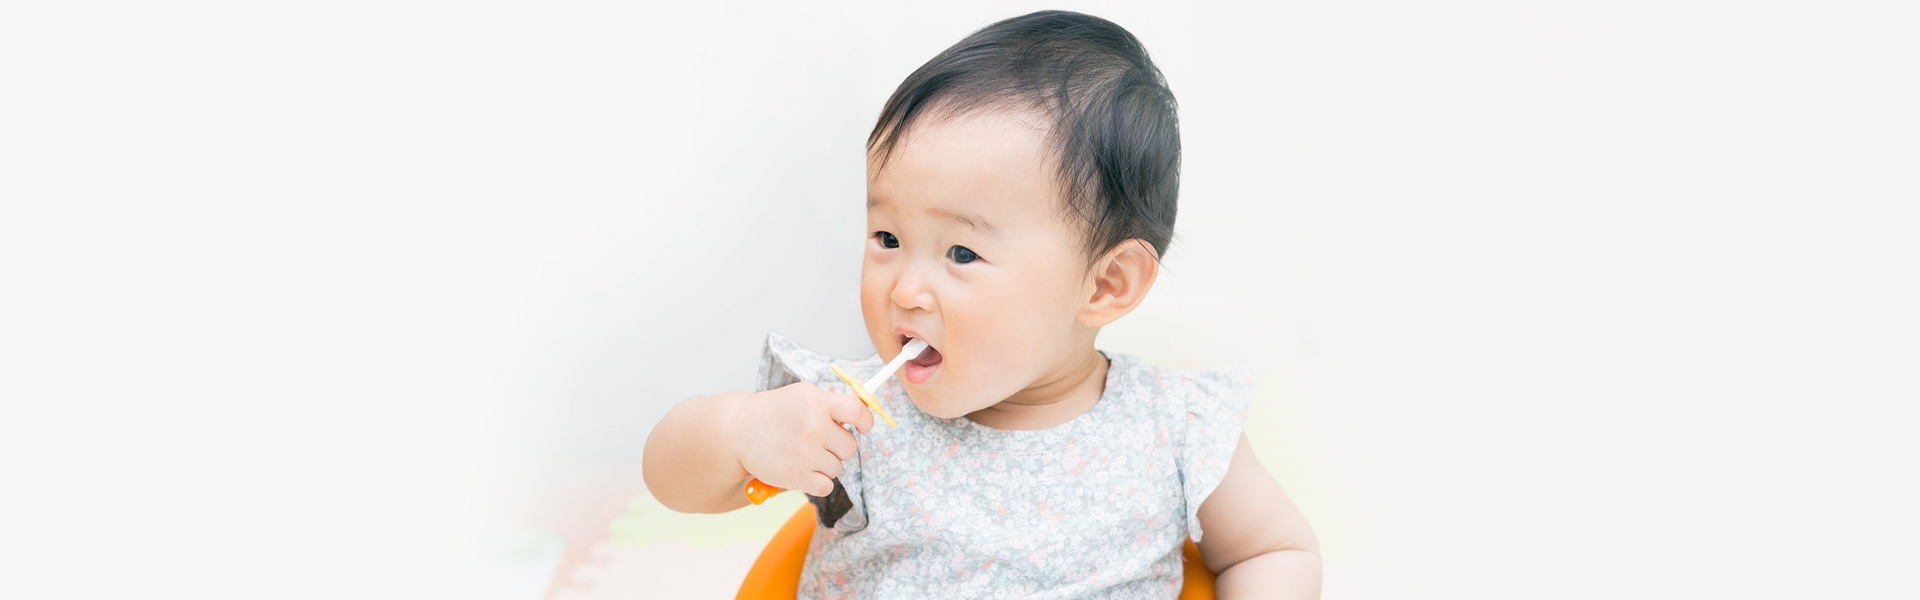 Curing Tooth Decay in Children from Home